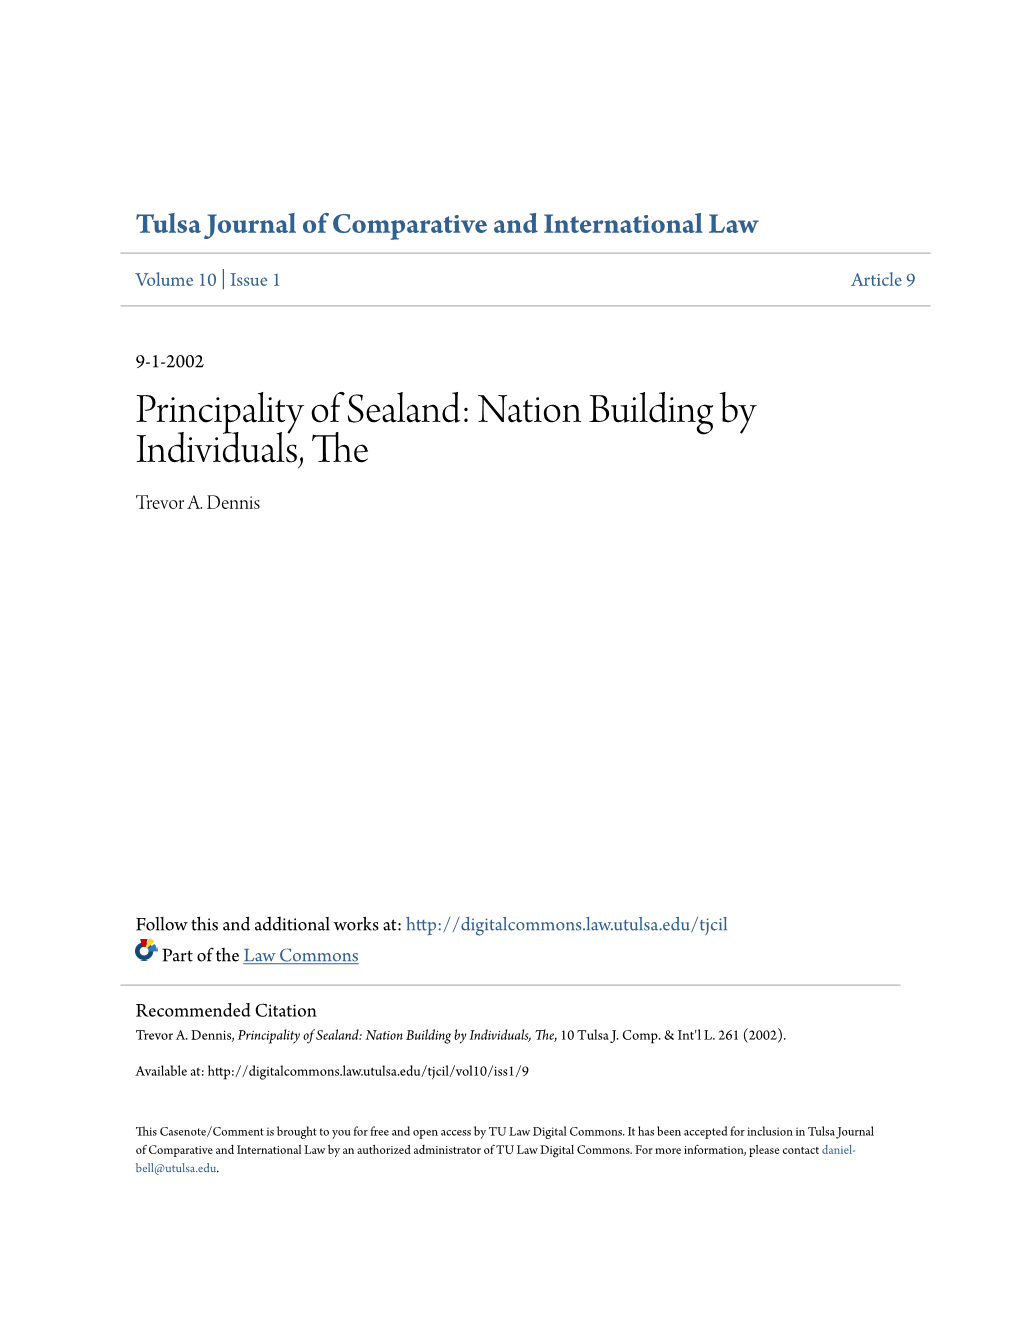 Principality of Sealand: Nation Building by Individuals, the Trevor A